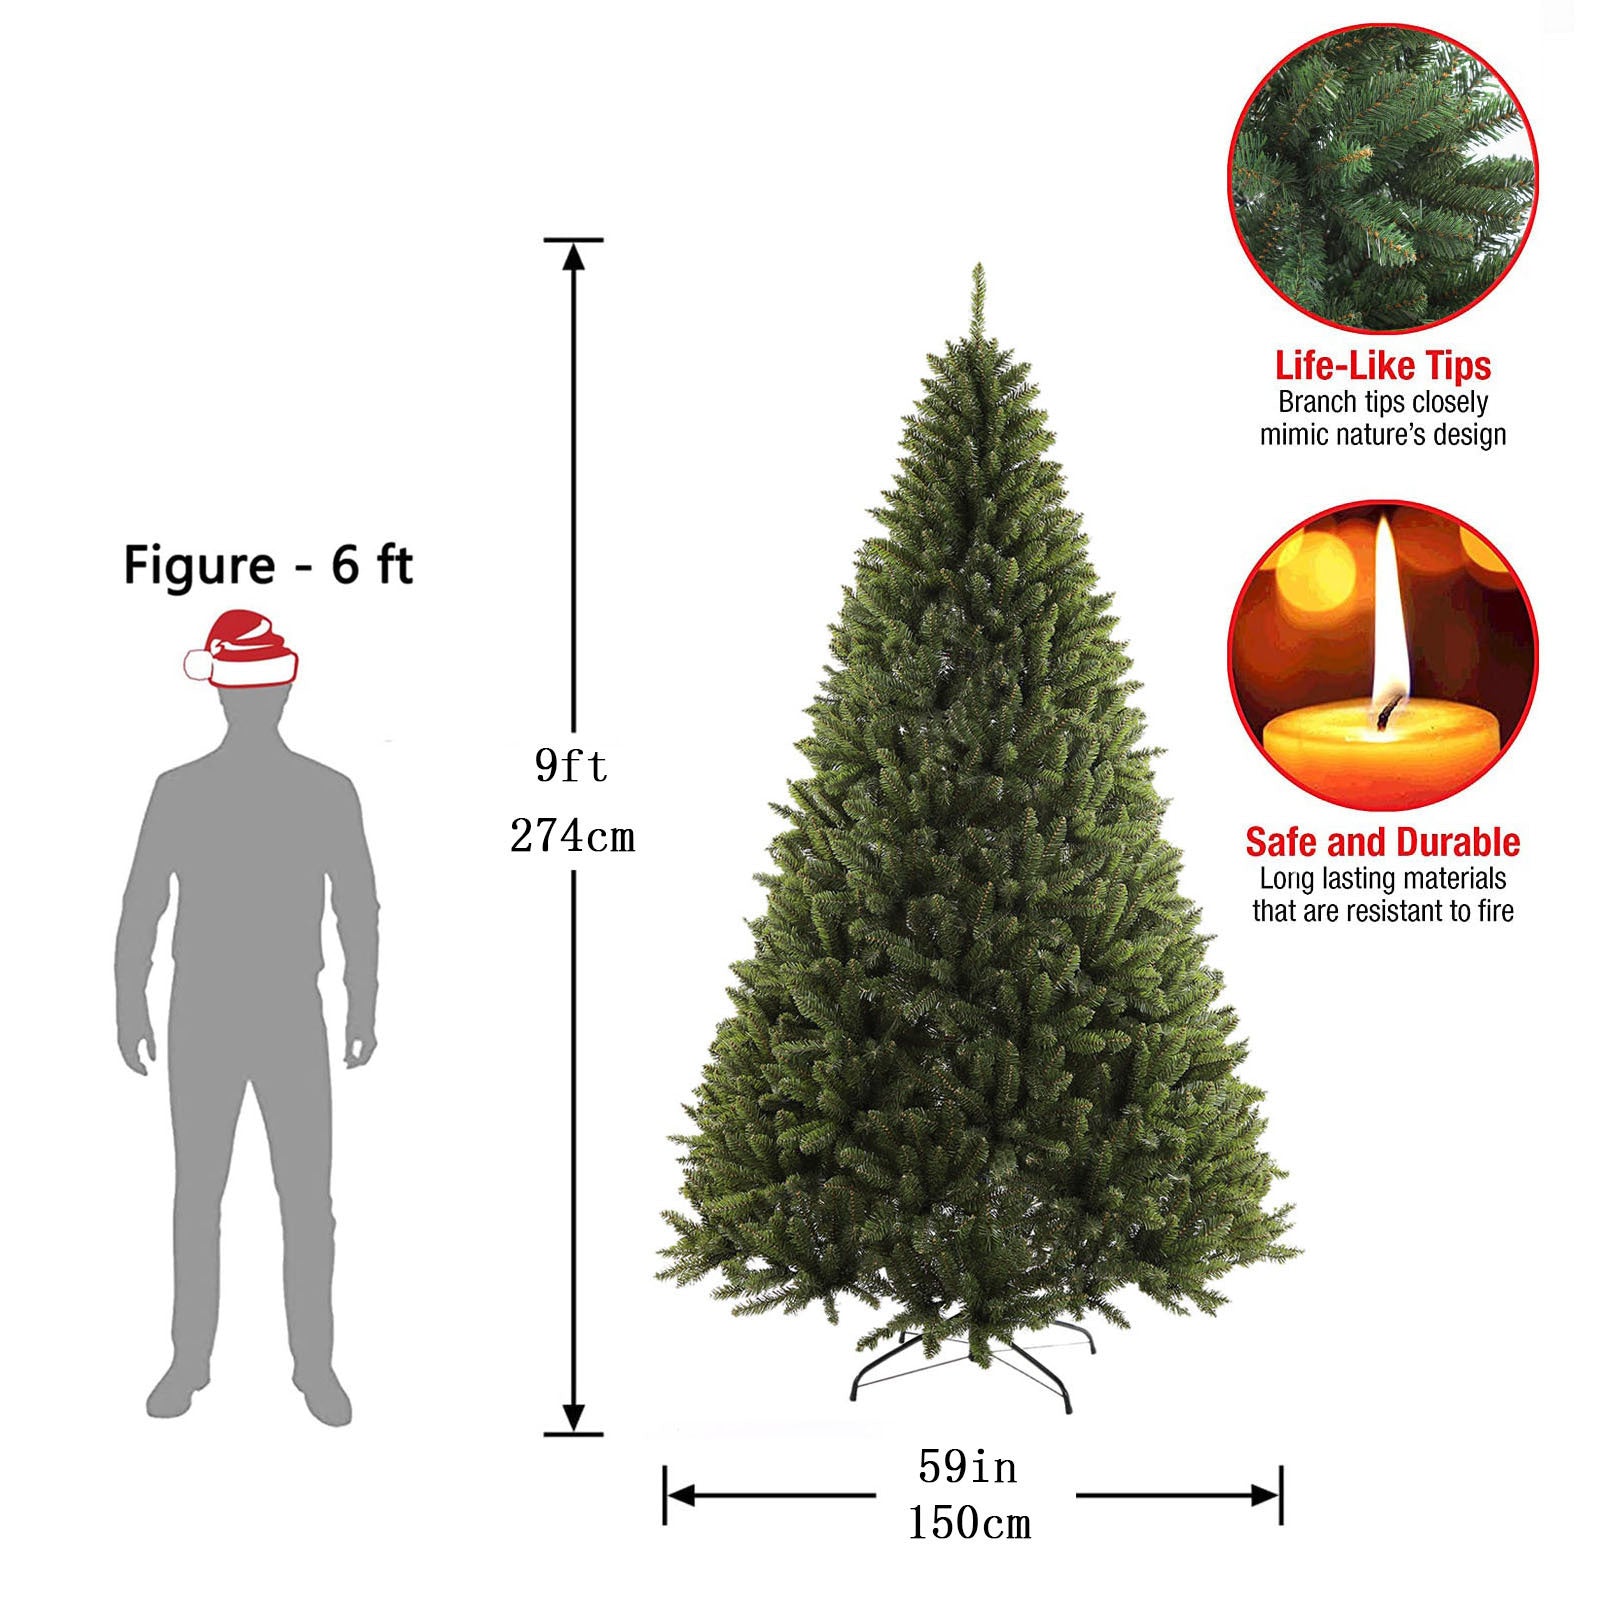 9ft Christmas Tree Artificial Full Xmas Trees, Green, for Holiday, Home, Office, Party Decoration, 2830 Branch Tips Metal Hinges & Foldable Base